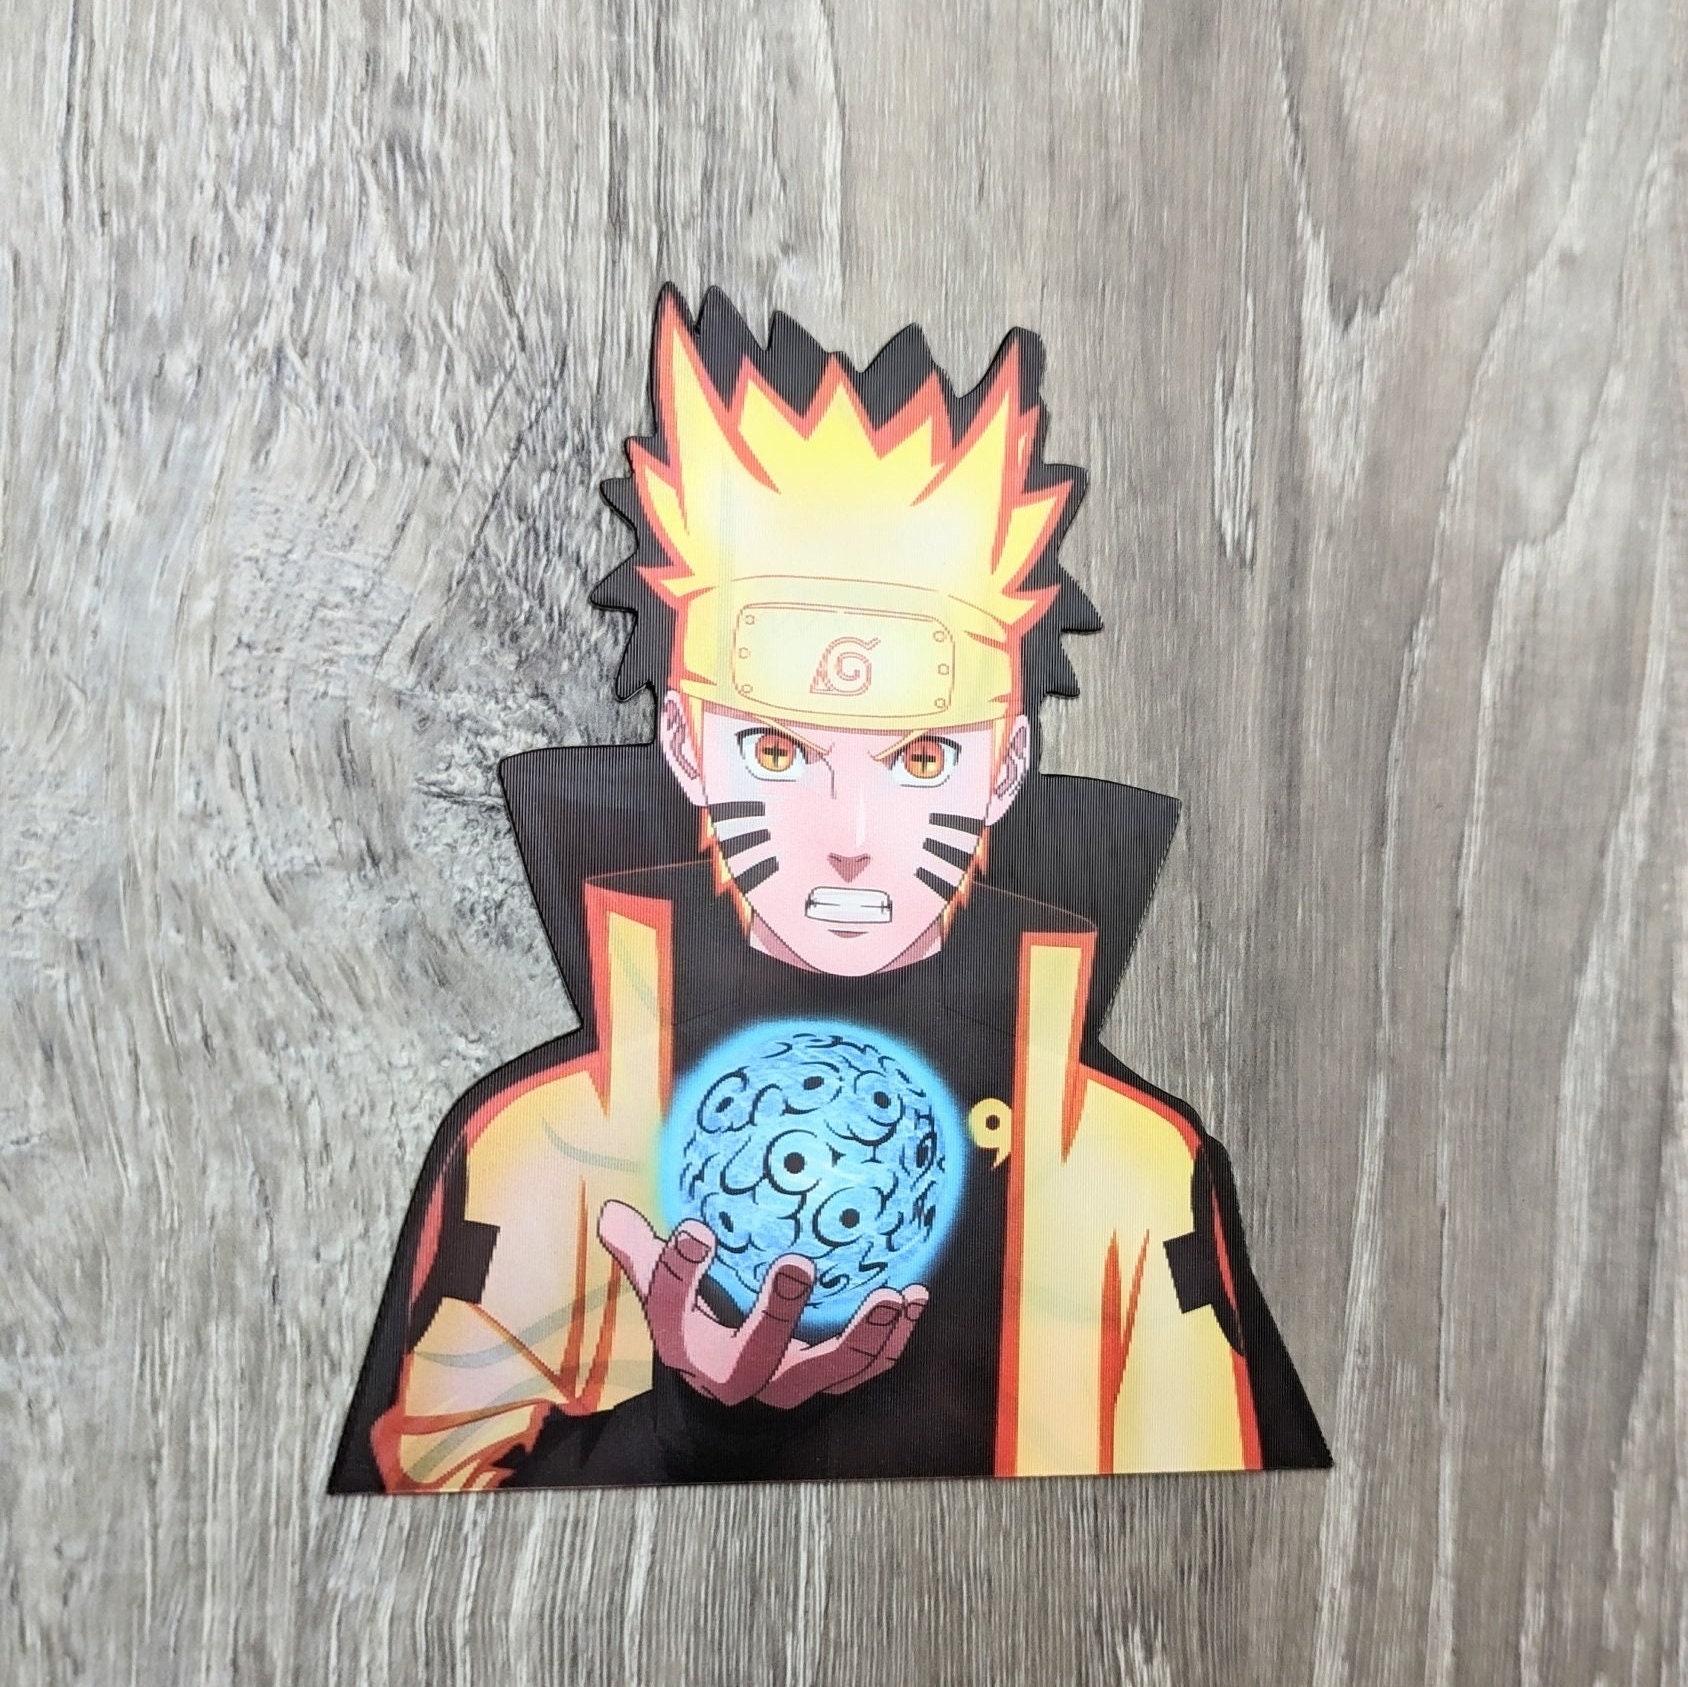 Naruto stickers for phone holders on Craiyon